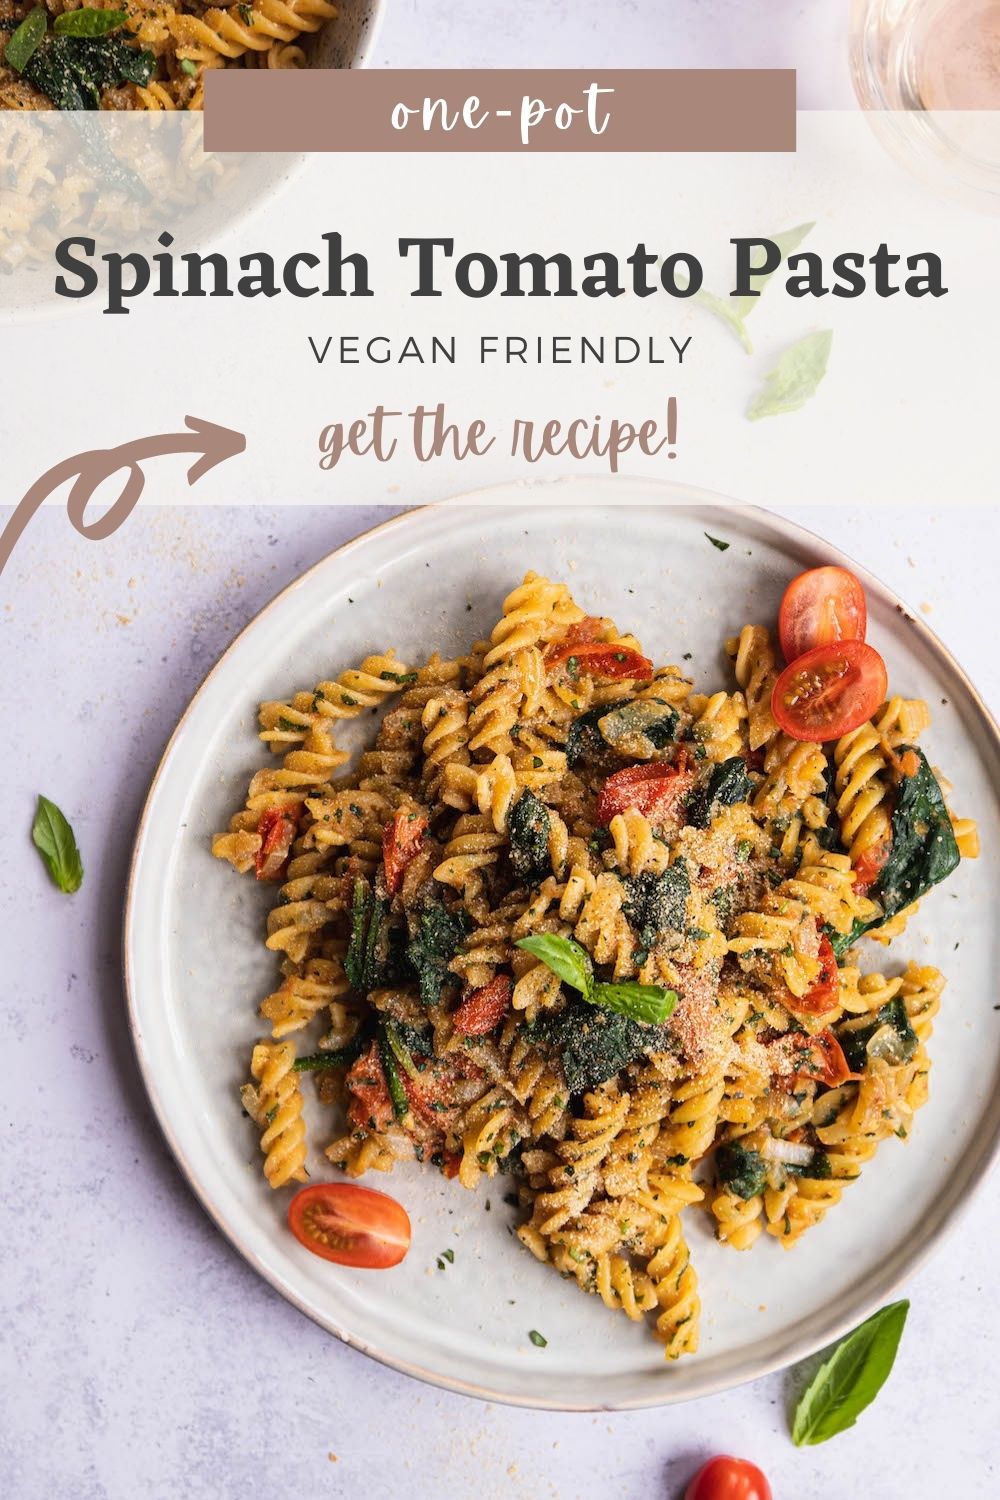 One-Pot Spinach Tomato Pasta - Spoonful of Kindness